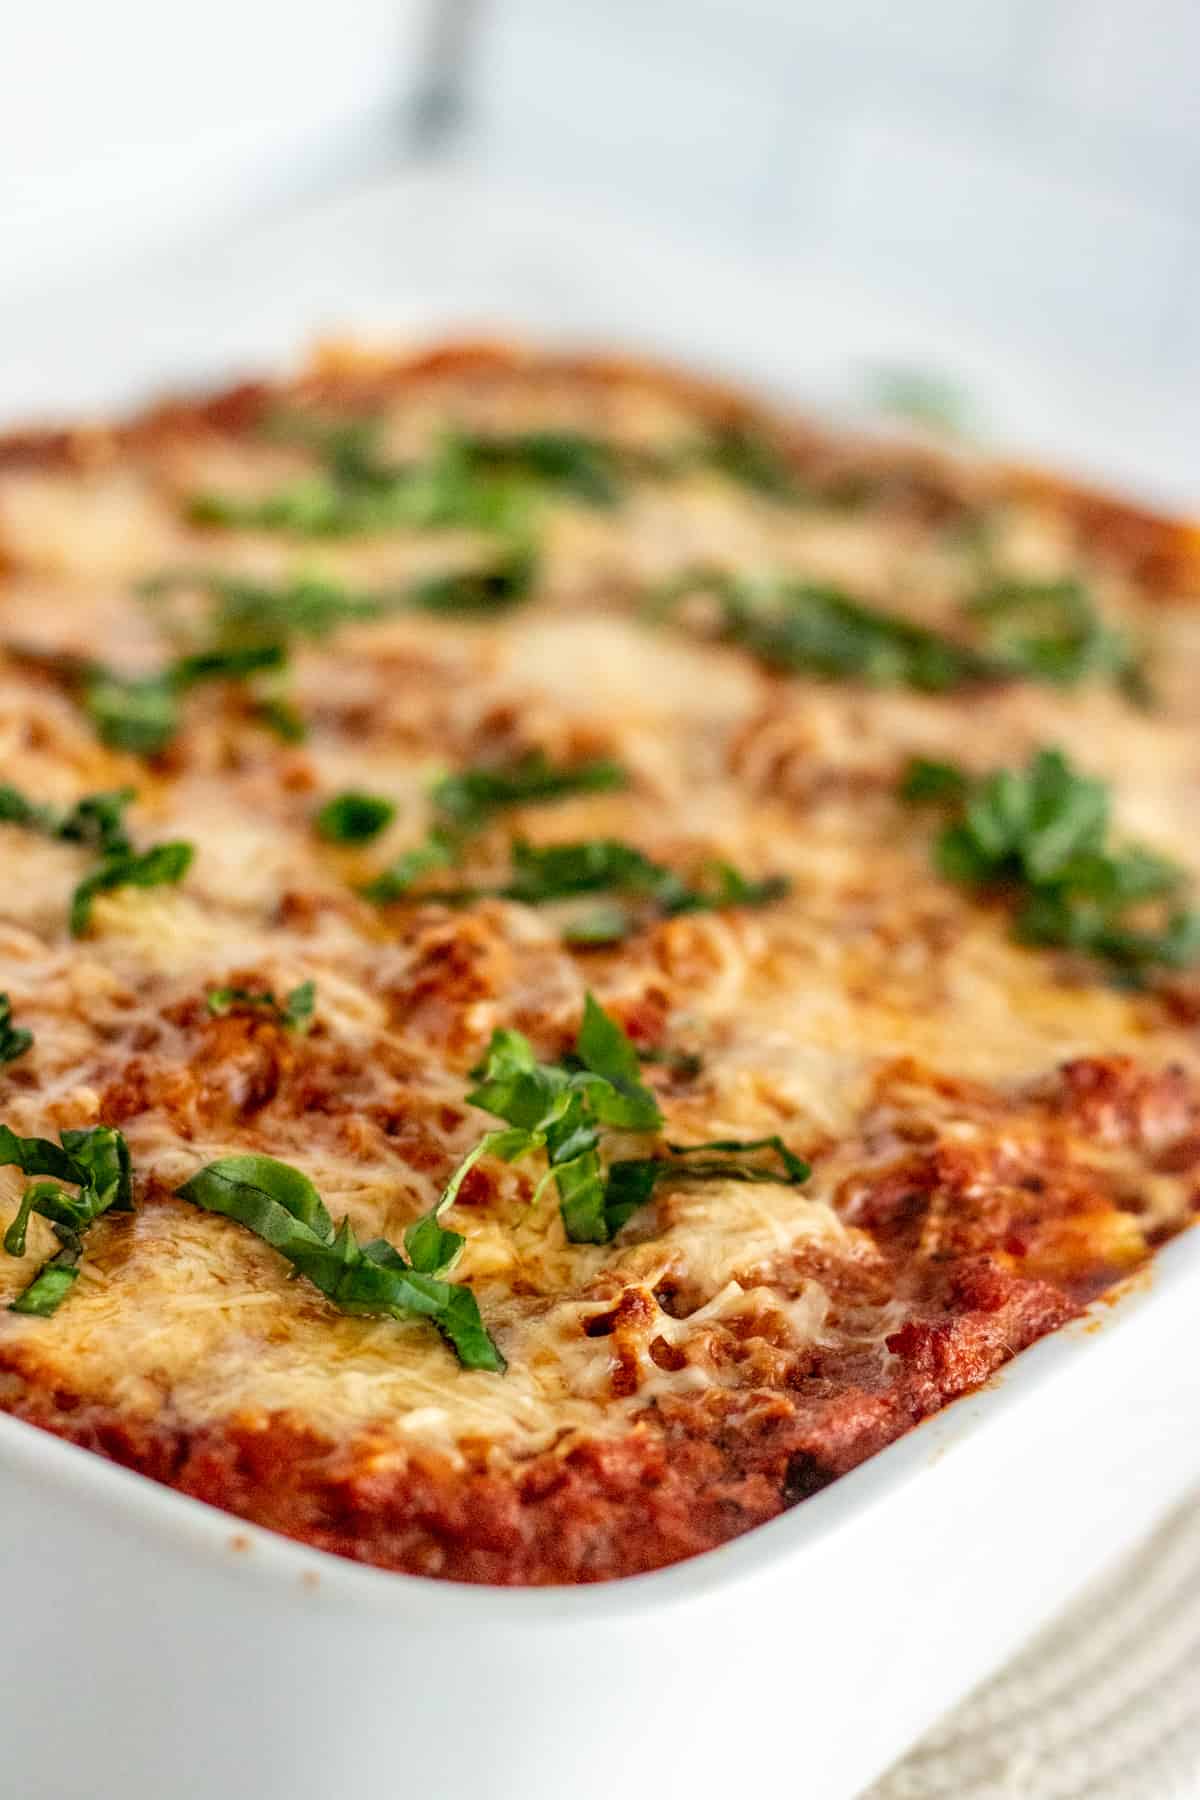 Baked ziti in a white baking dish with parsley over the top